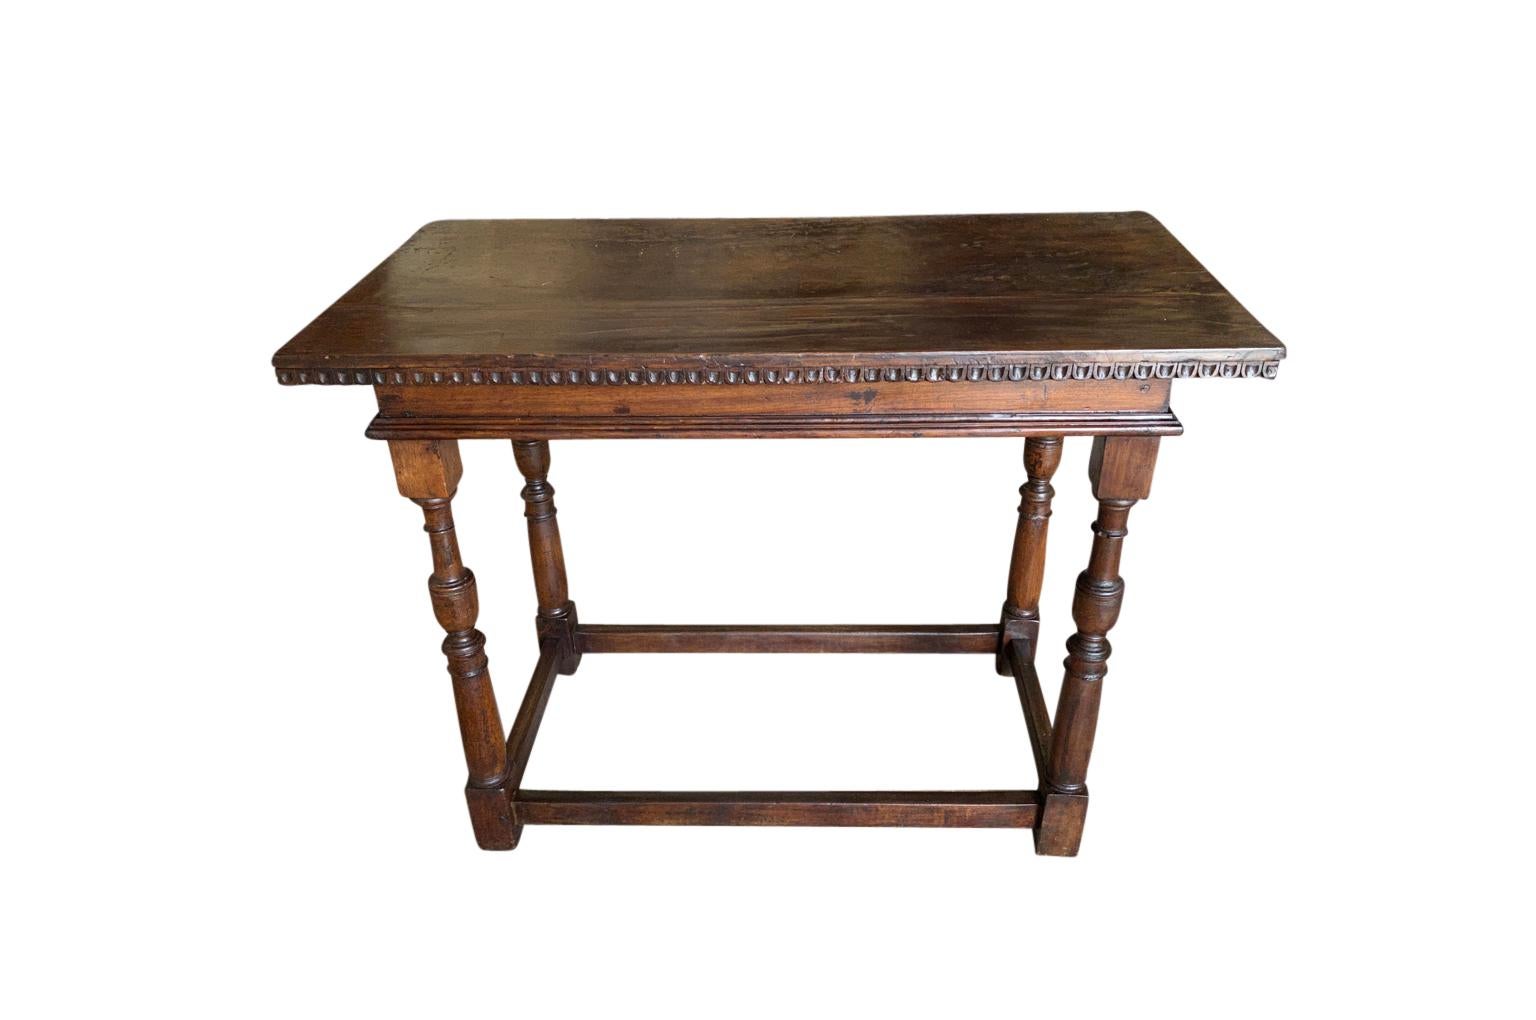 A very handsome 18th century Console Table from the Lombardy region of Italy. Wonderfully constructed from beautiful walnut with a solid board top and nicely turned legs. Terrific patina - rich and luminous.